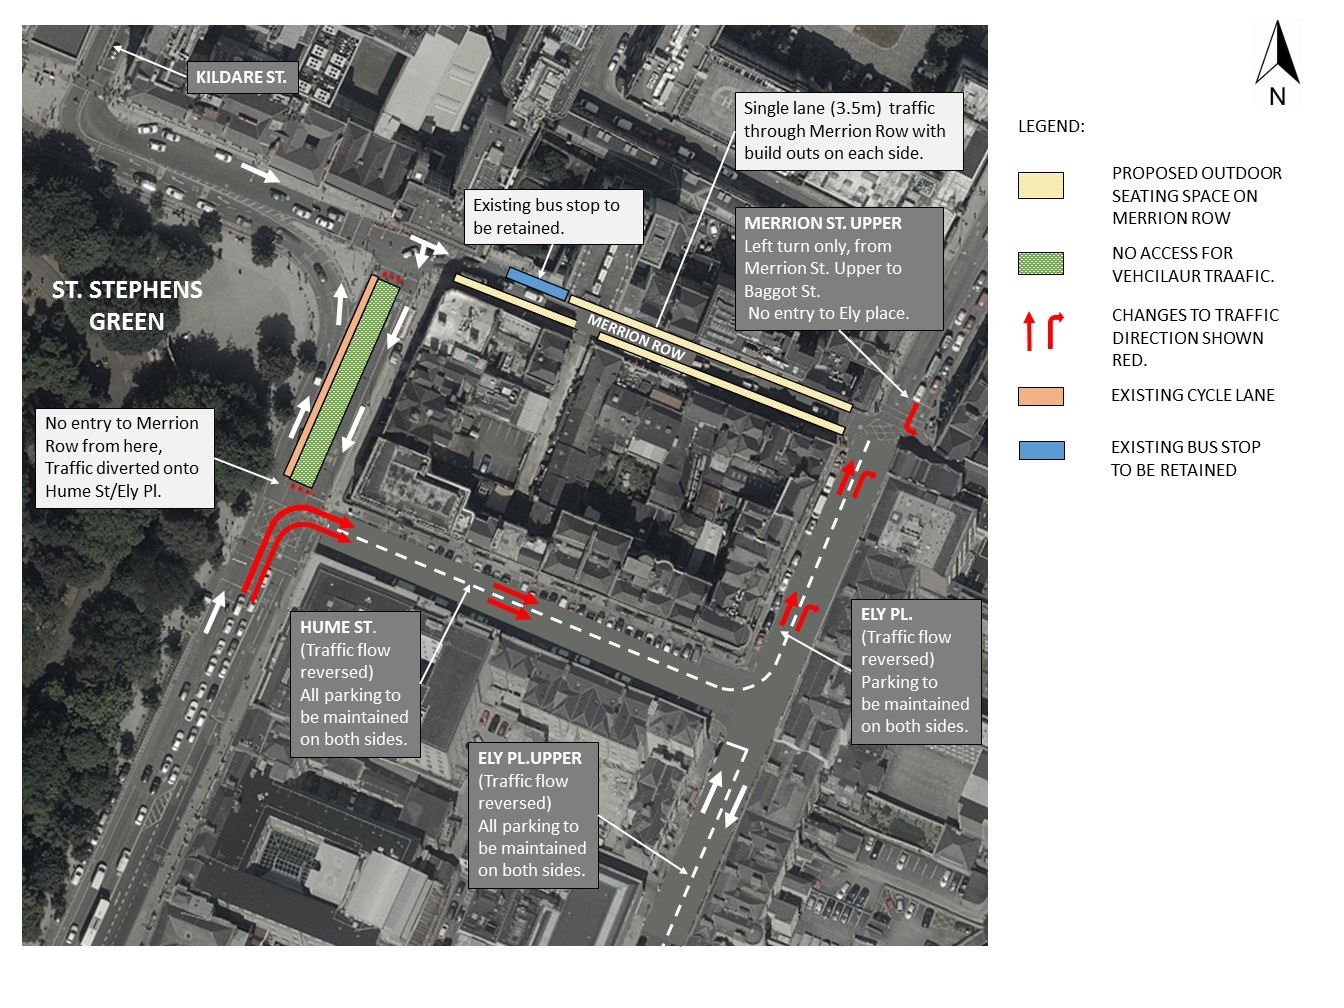 Photo showing the proposed changes around Merrion Row